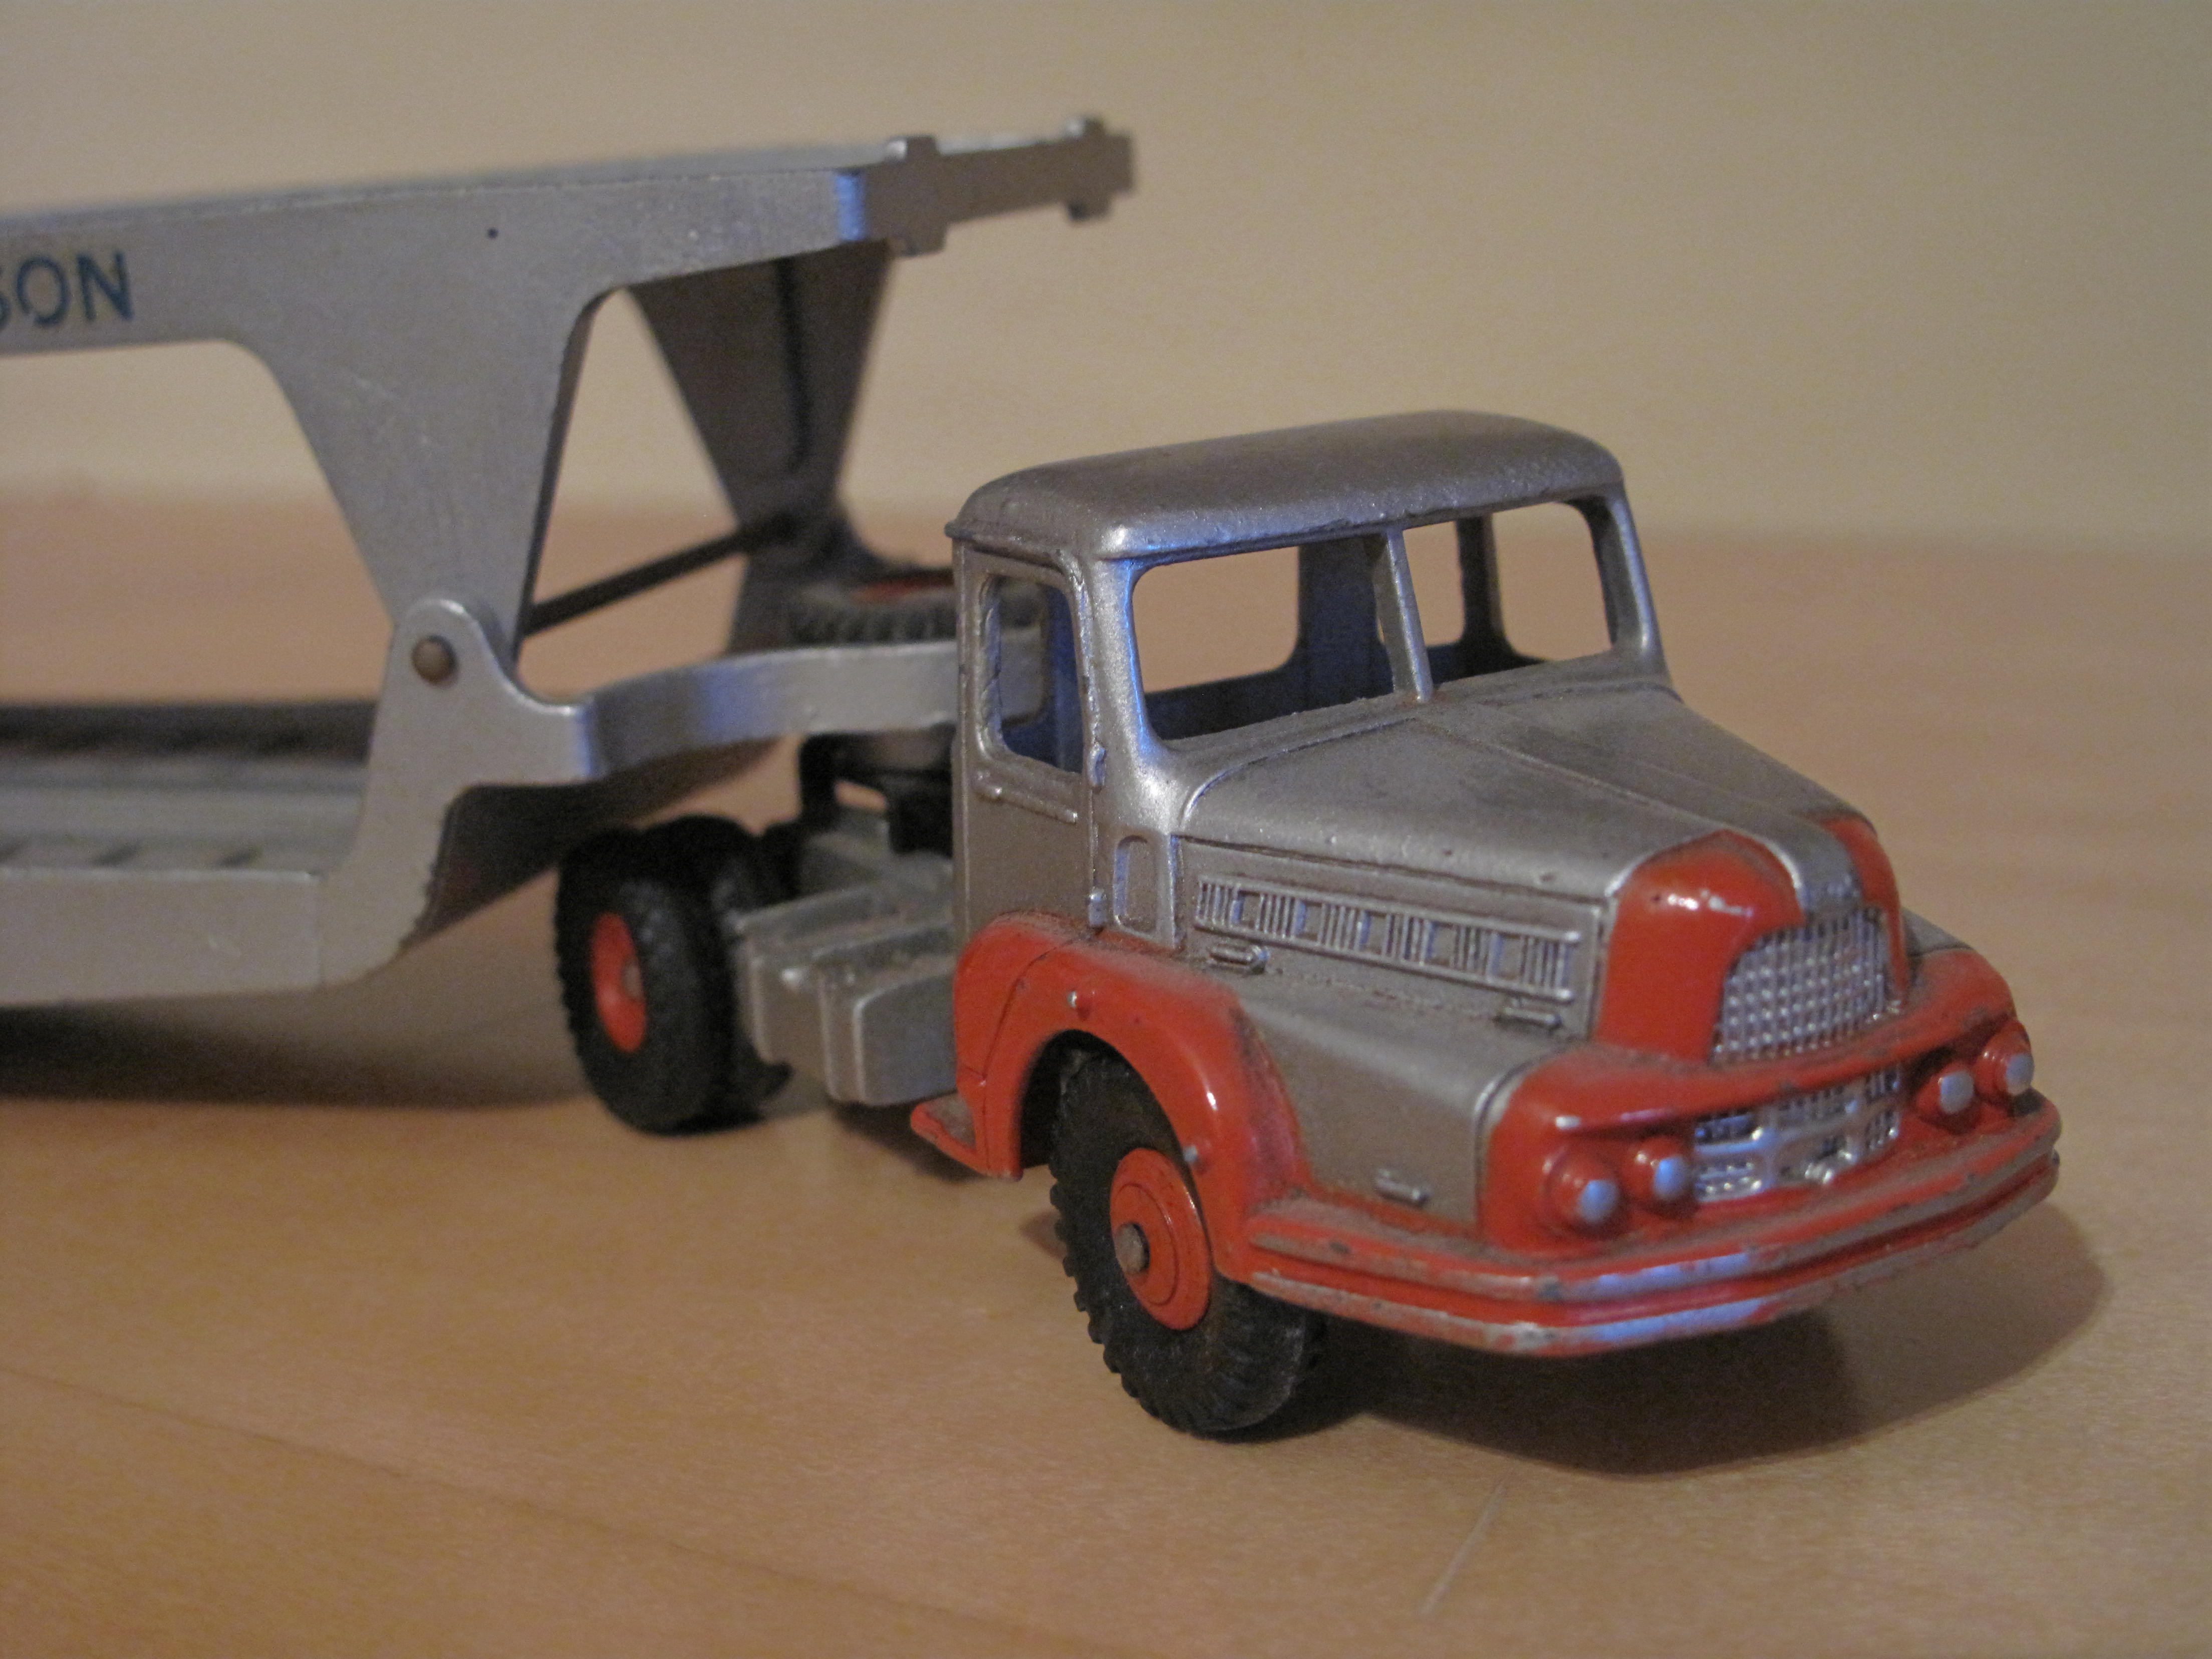 camion dinky toys